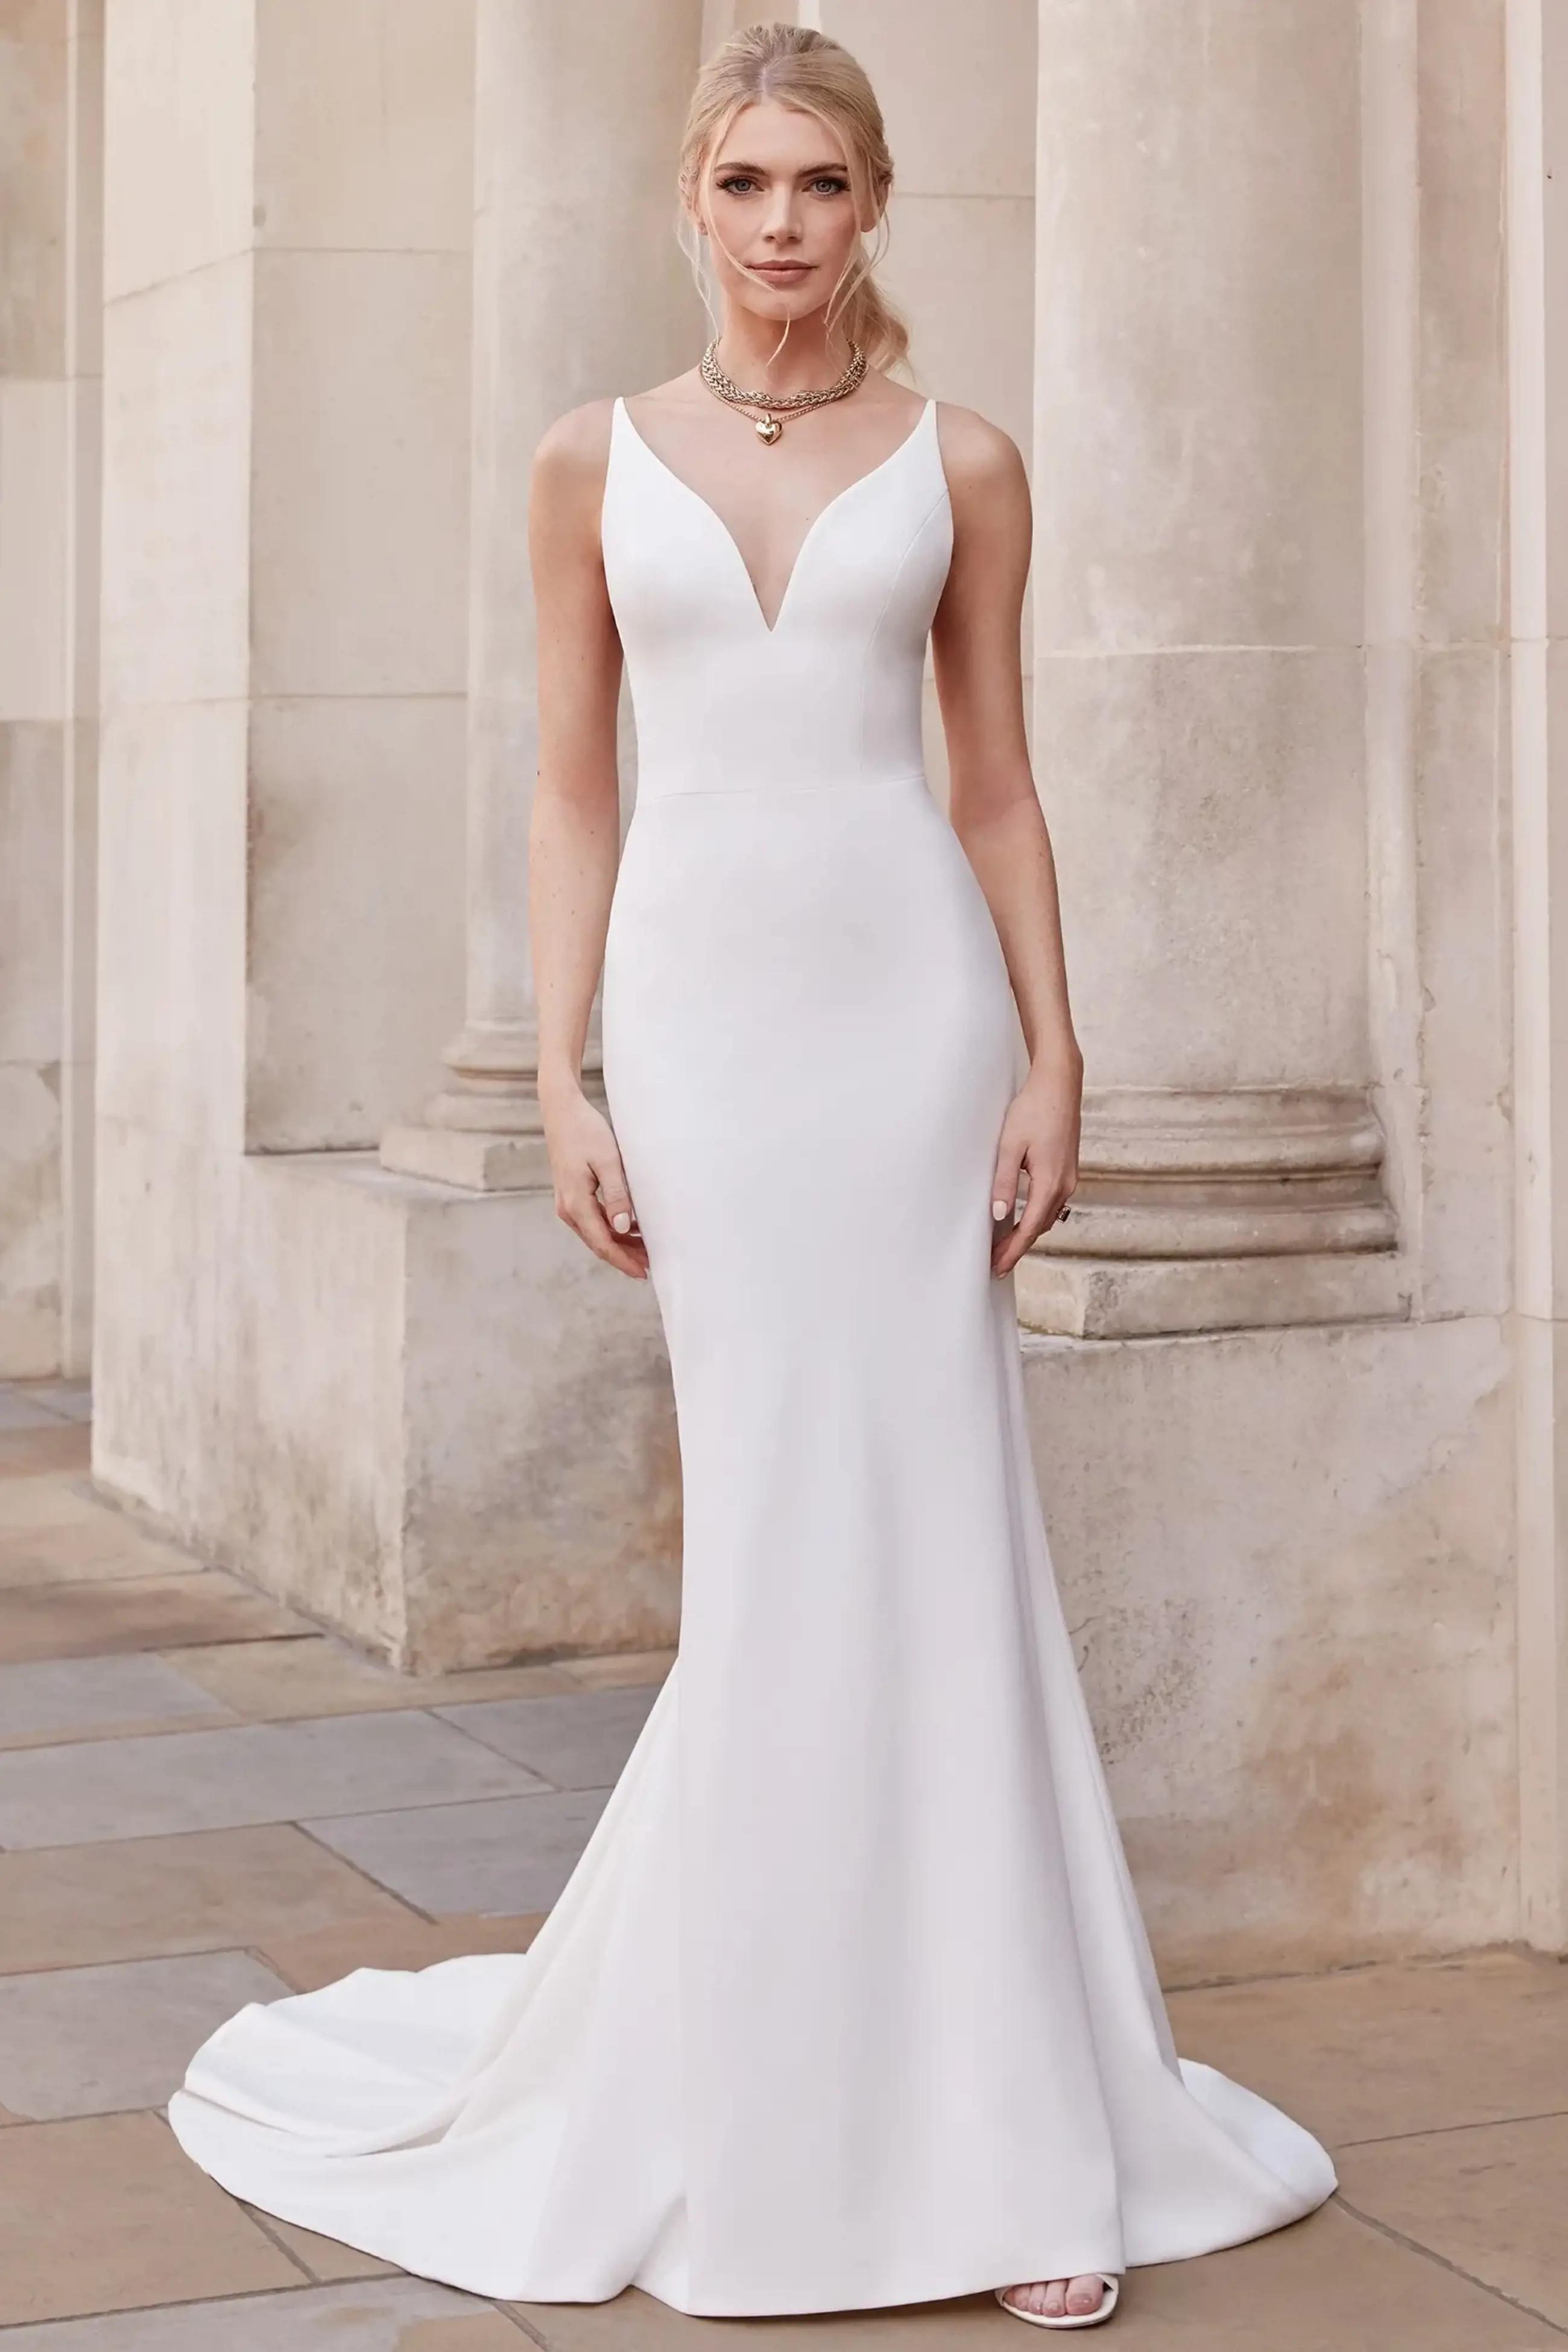 When To Buy A Wedding Dress Image